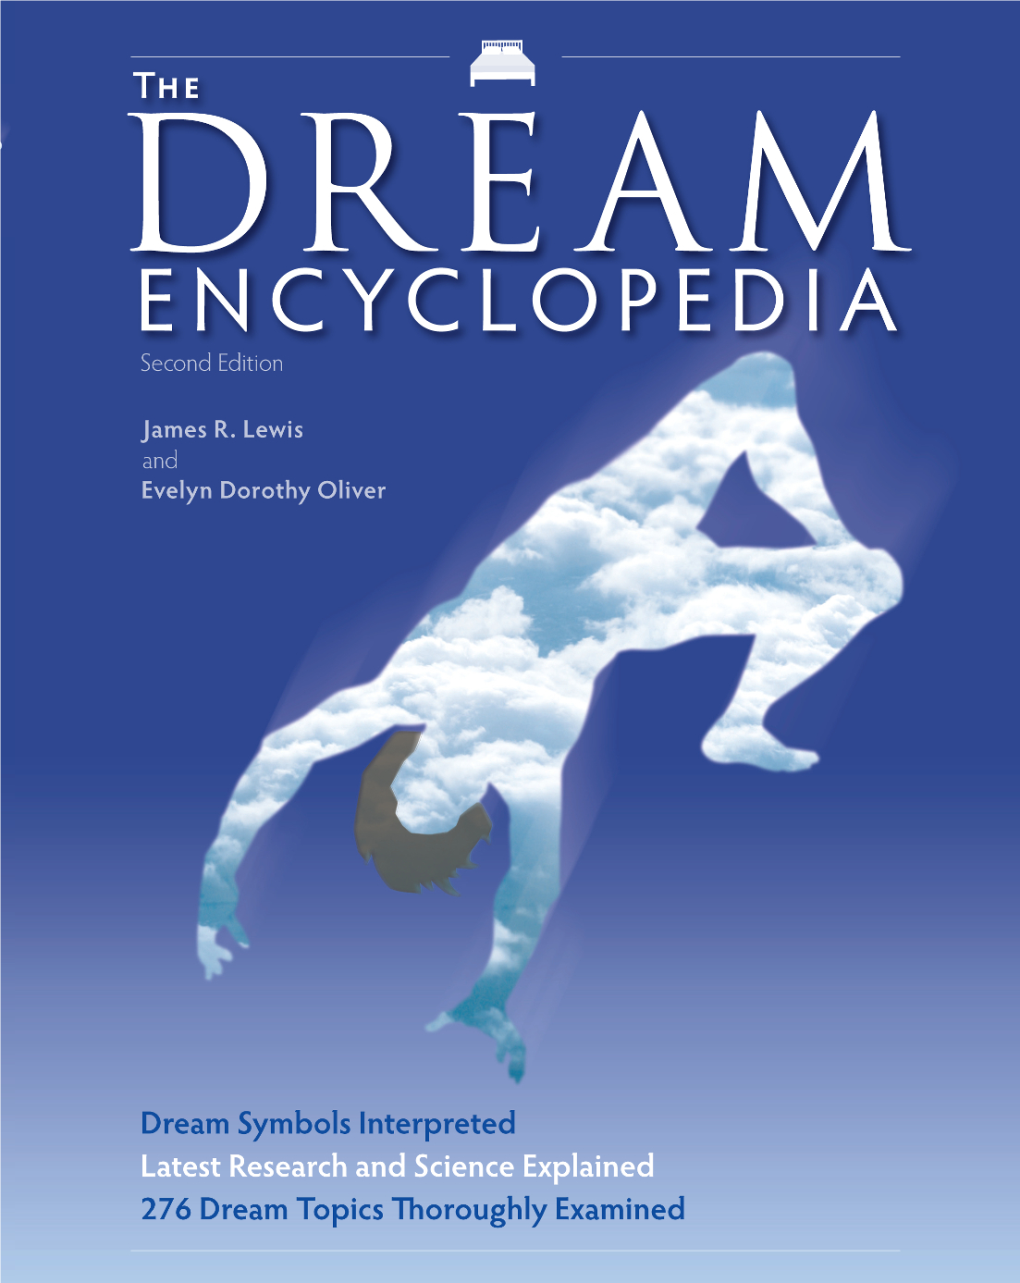 The Dream Encyclopedia, Second Edition